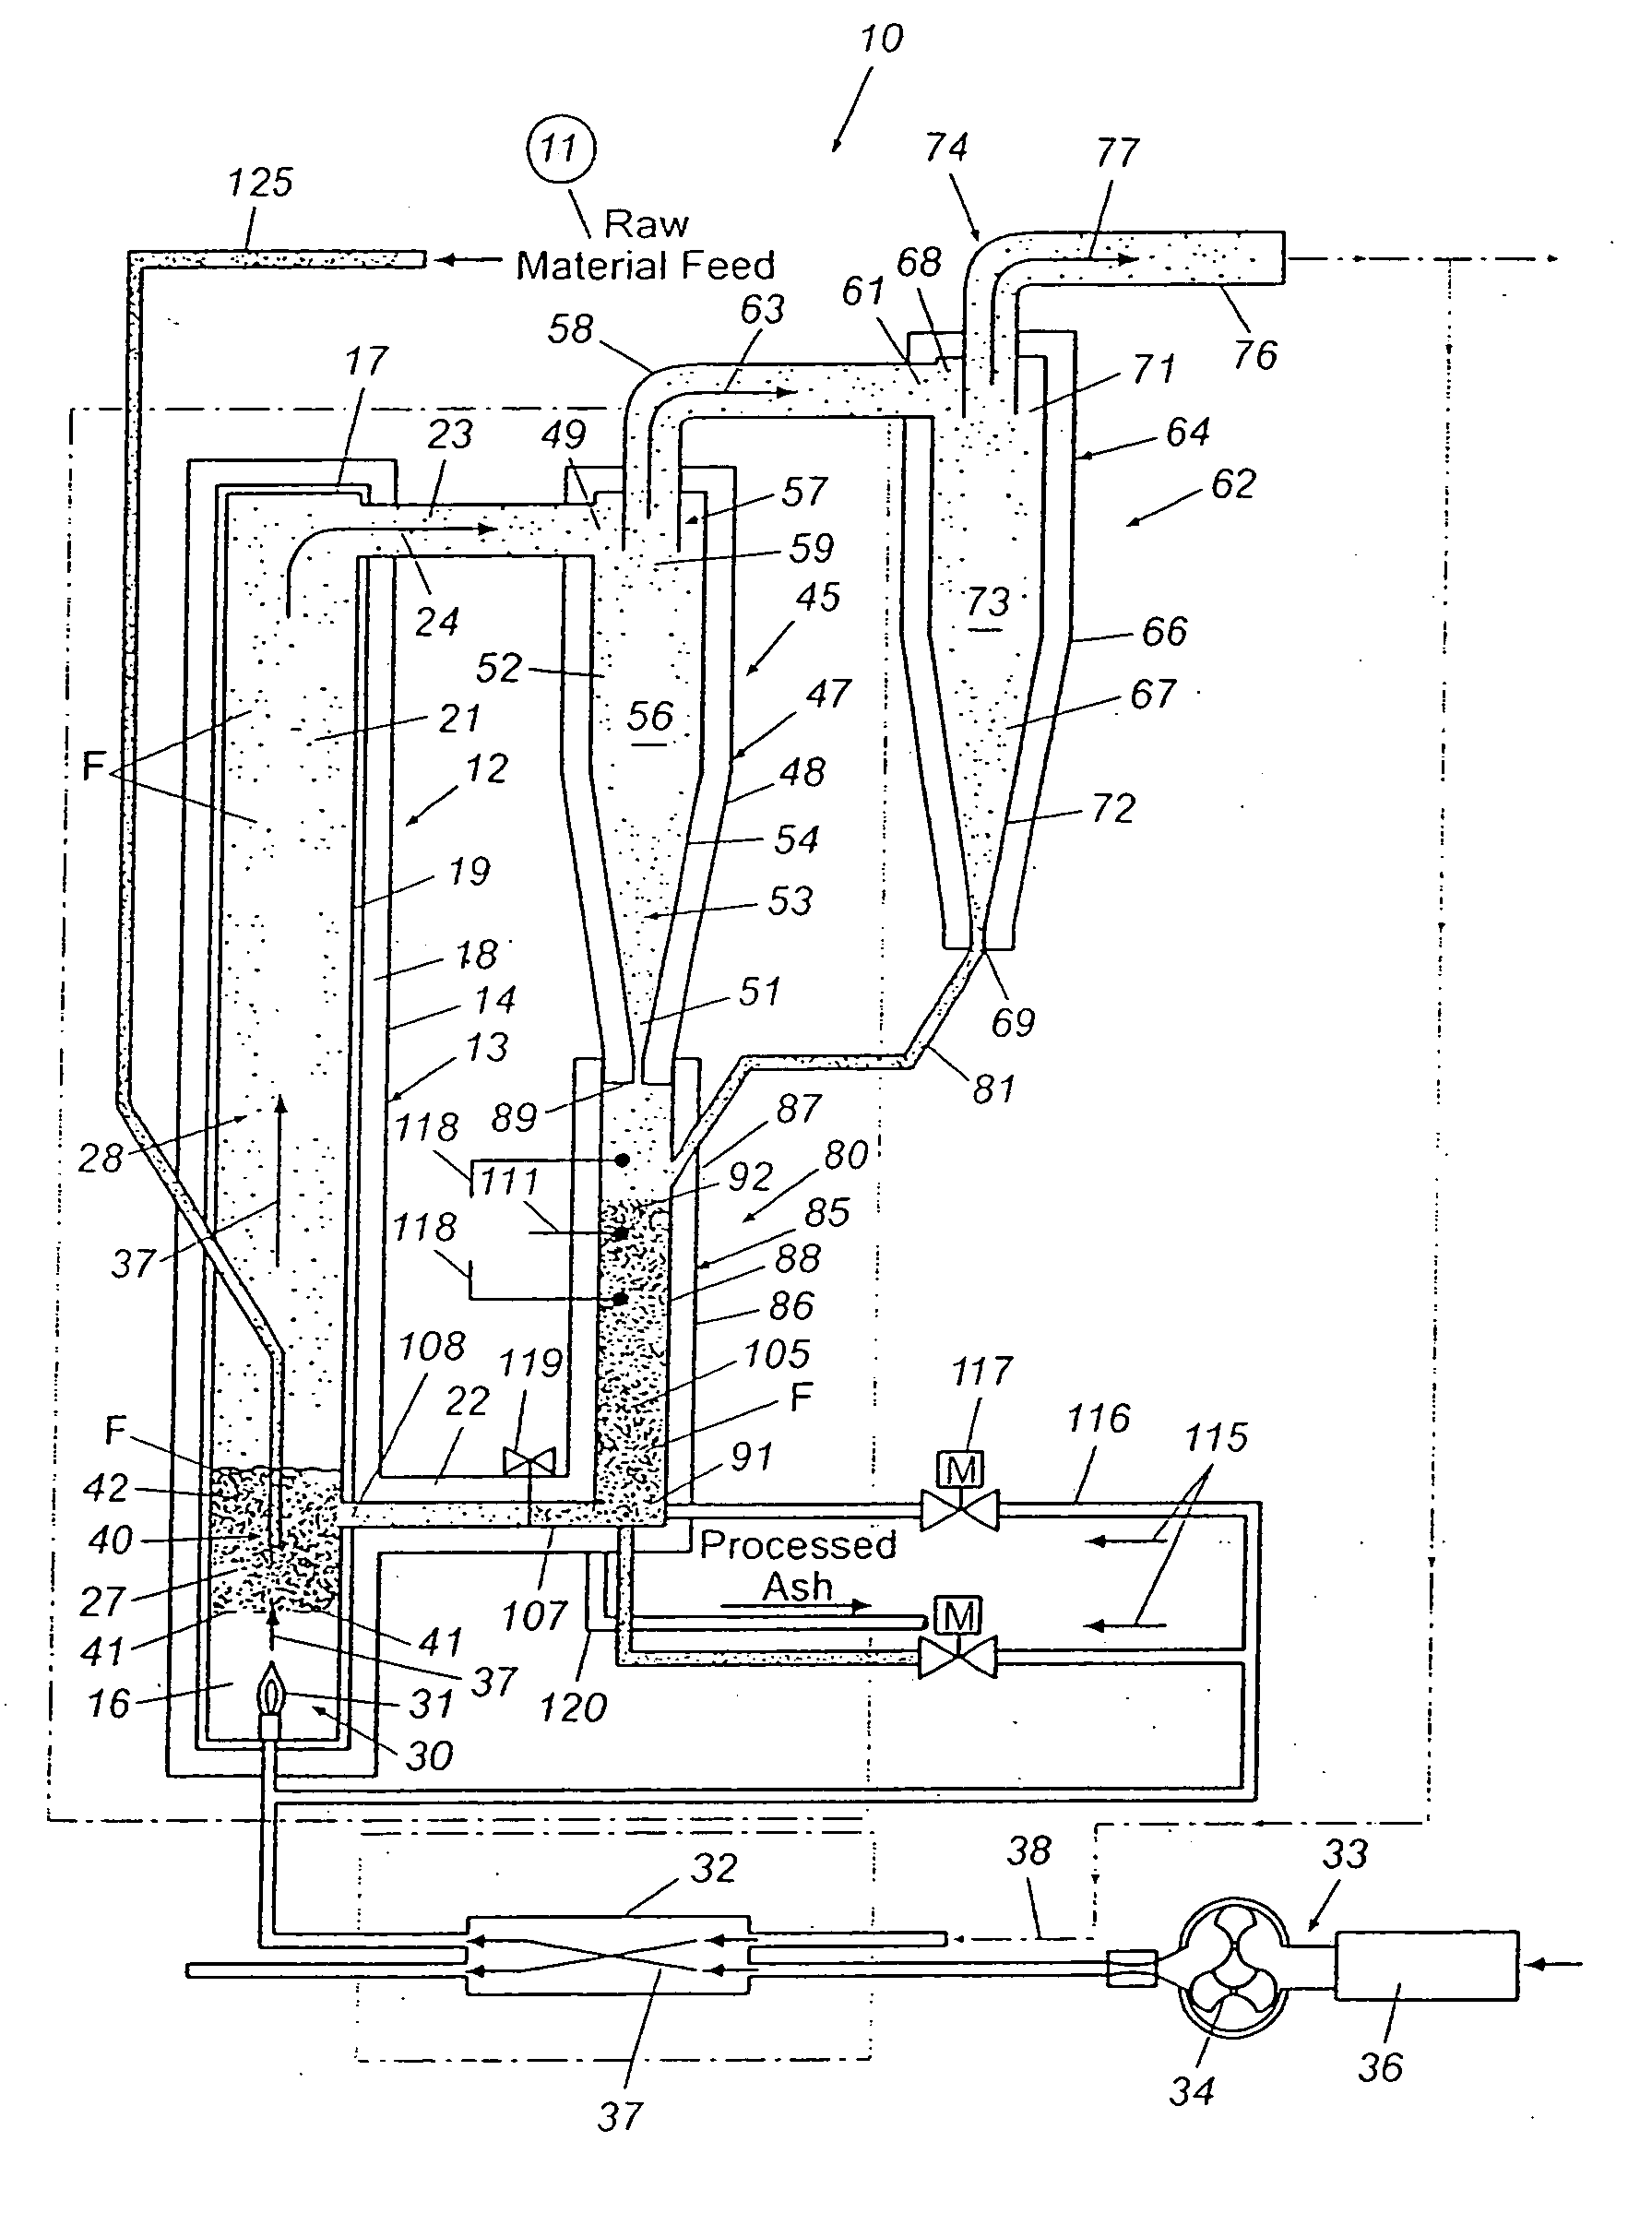 Method and apparatus for combustion of residual carbon in fly ash